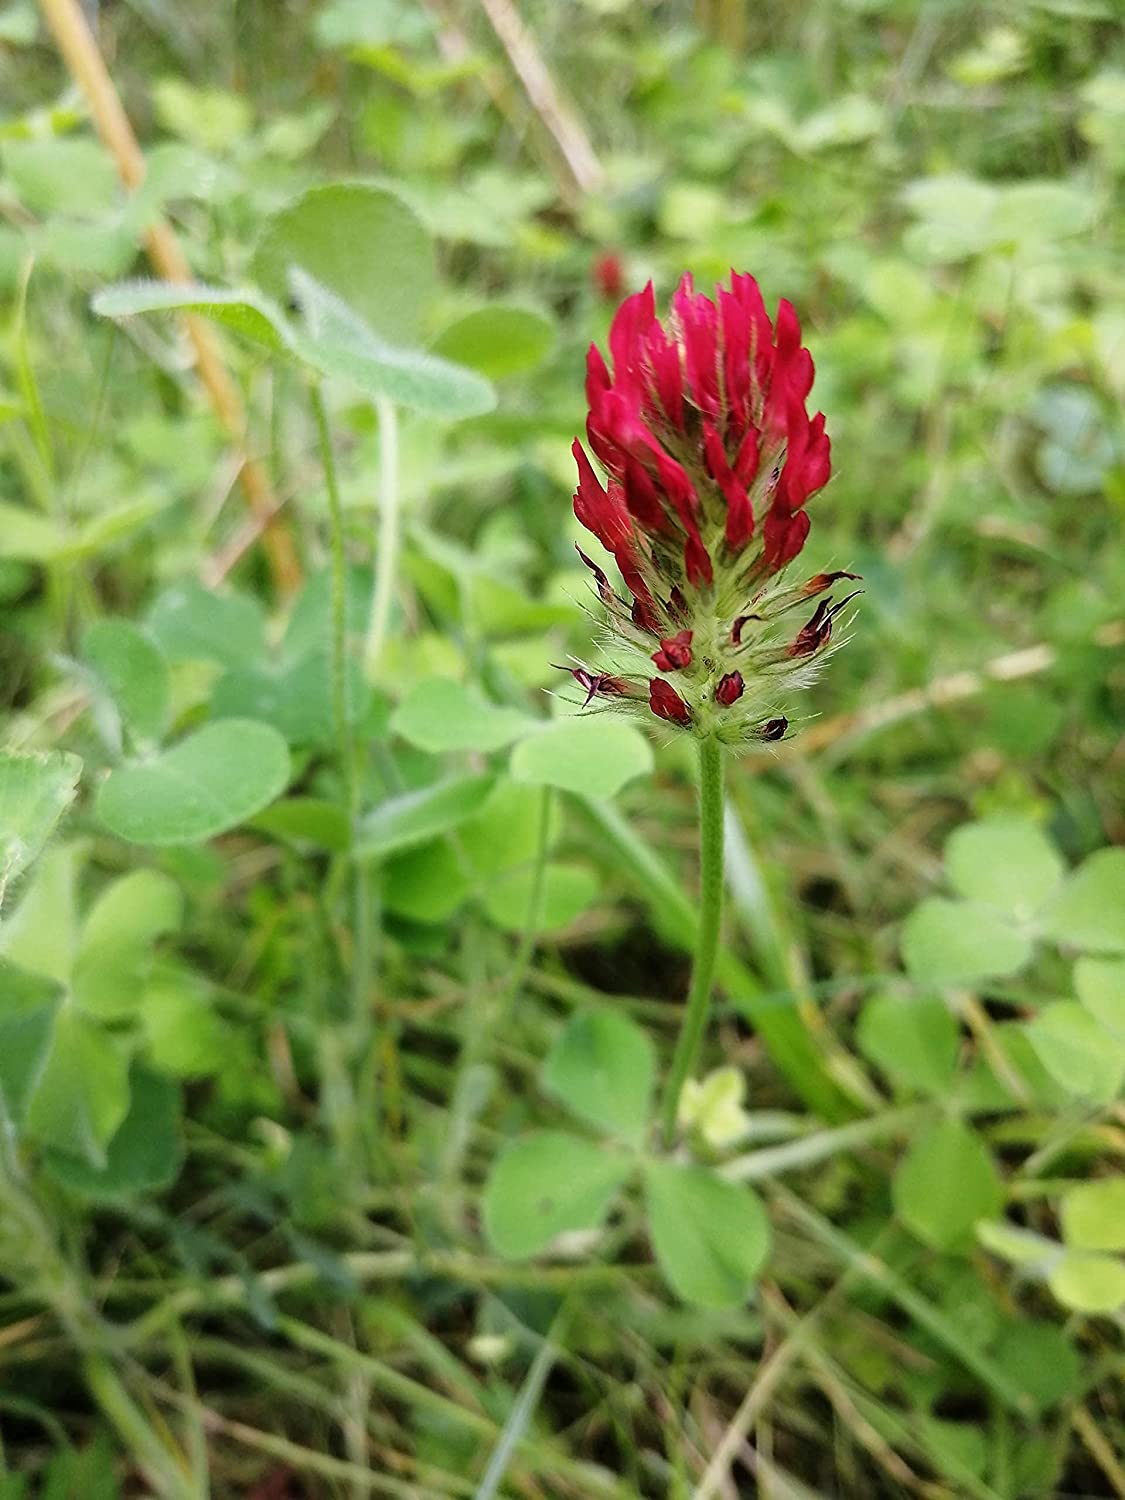 Hundredfold Crimson Clover 0.5oz (15g) Seeds - Trifolium incarnatum Attractive Flower, Forage and Cover Crop, Covers 50ft², for Lawn, Garden, Food Plot & Cropland